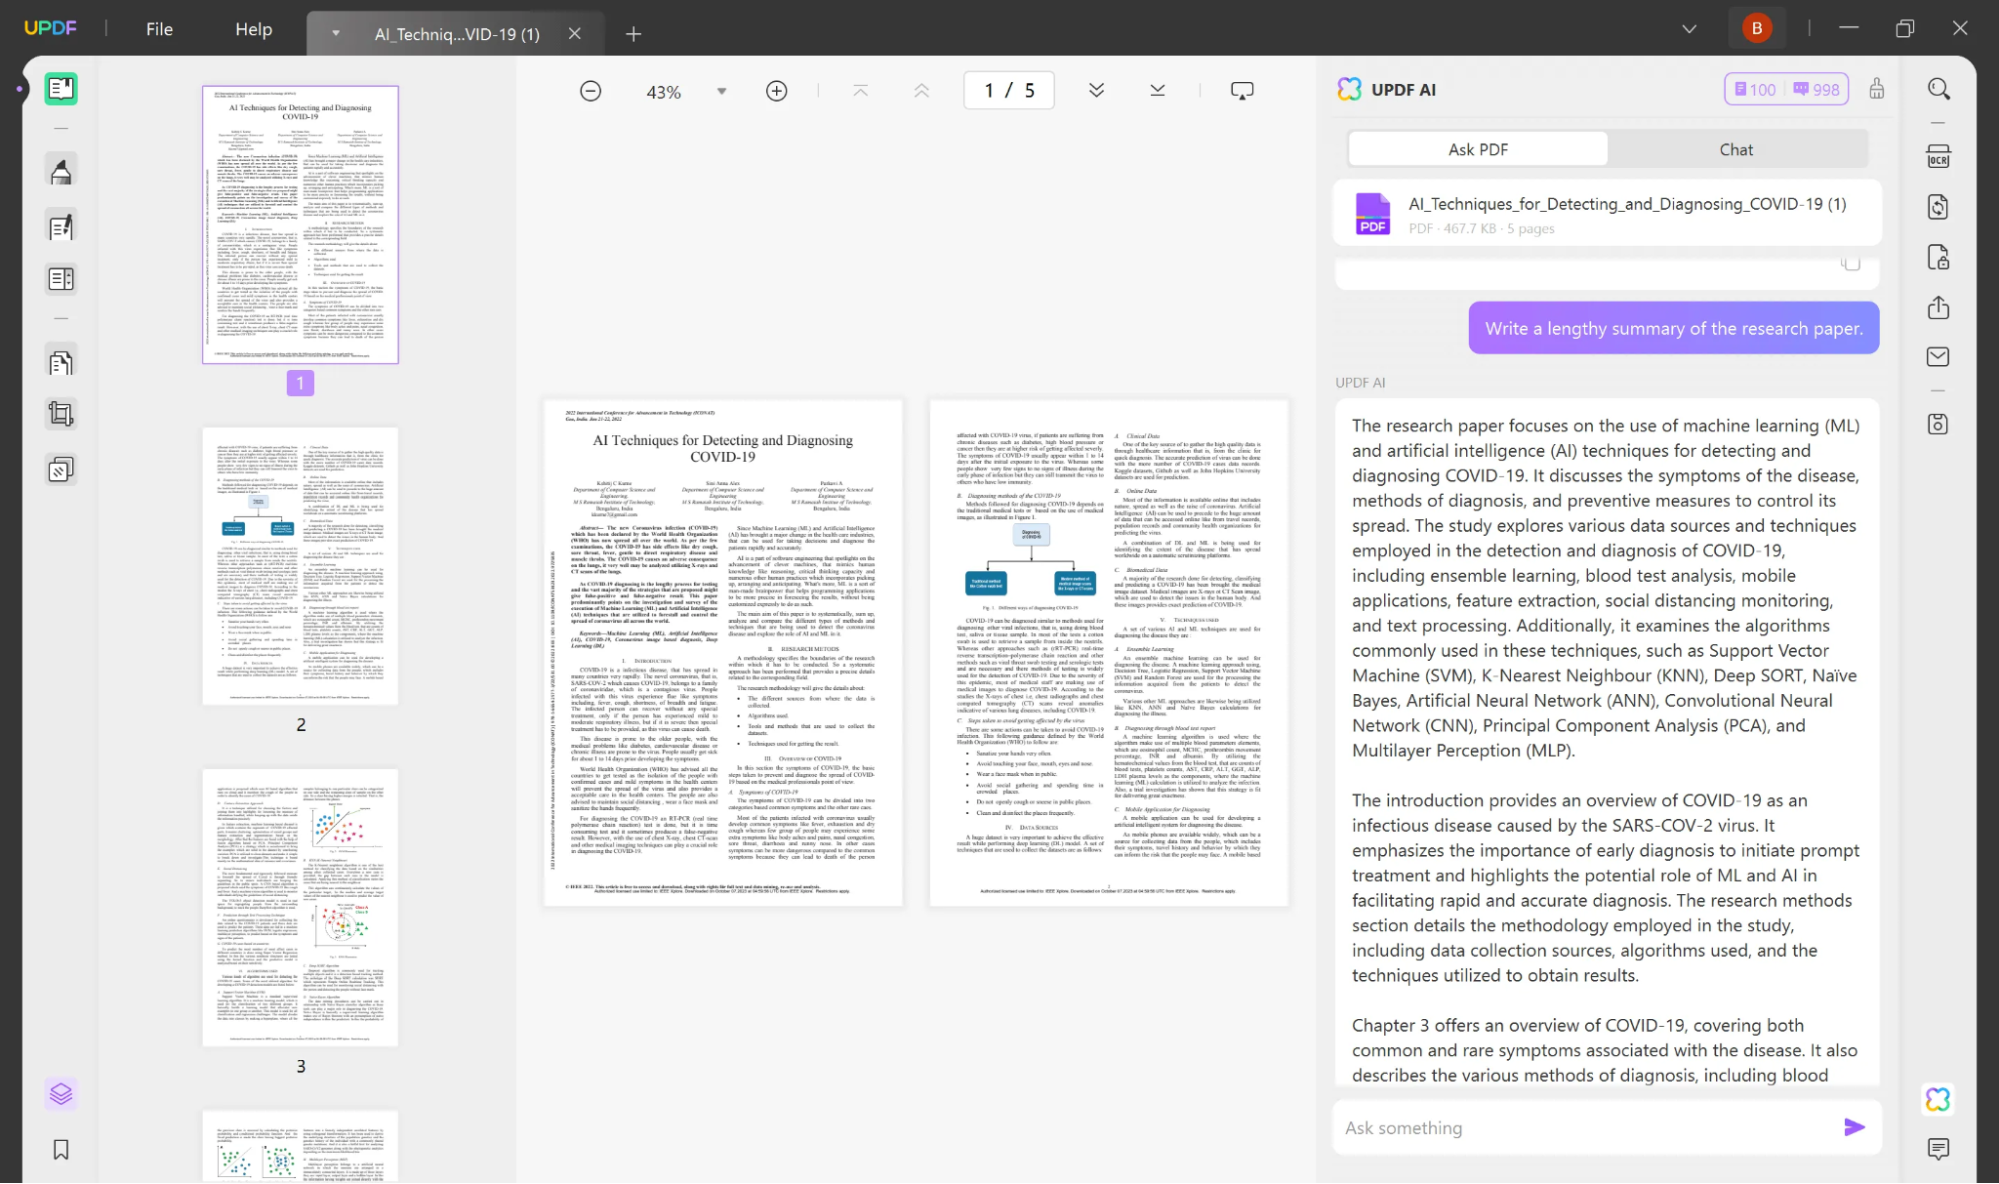 Summarize long and wordy PDFs